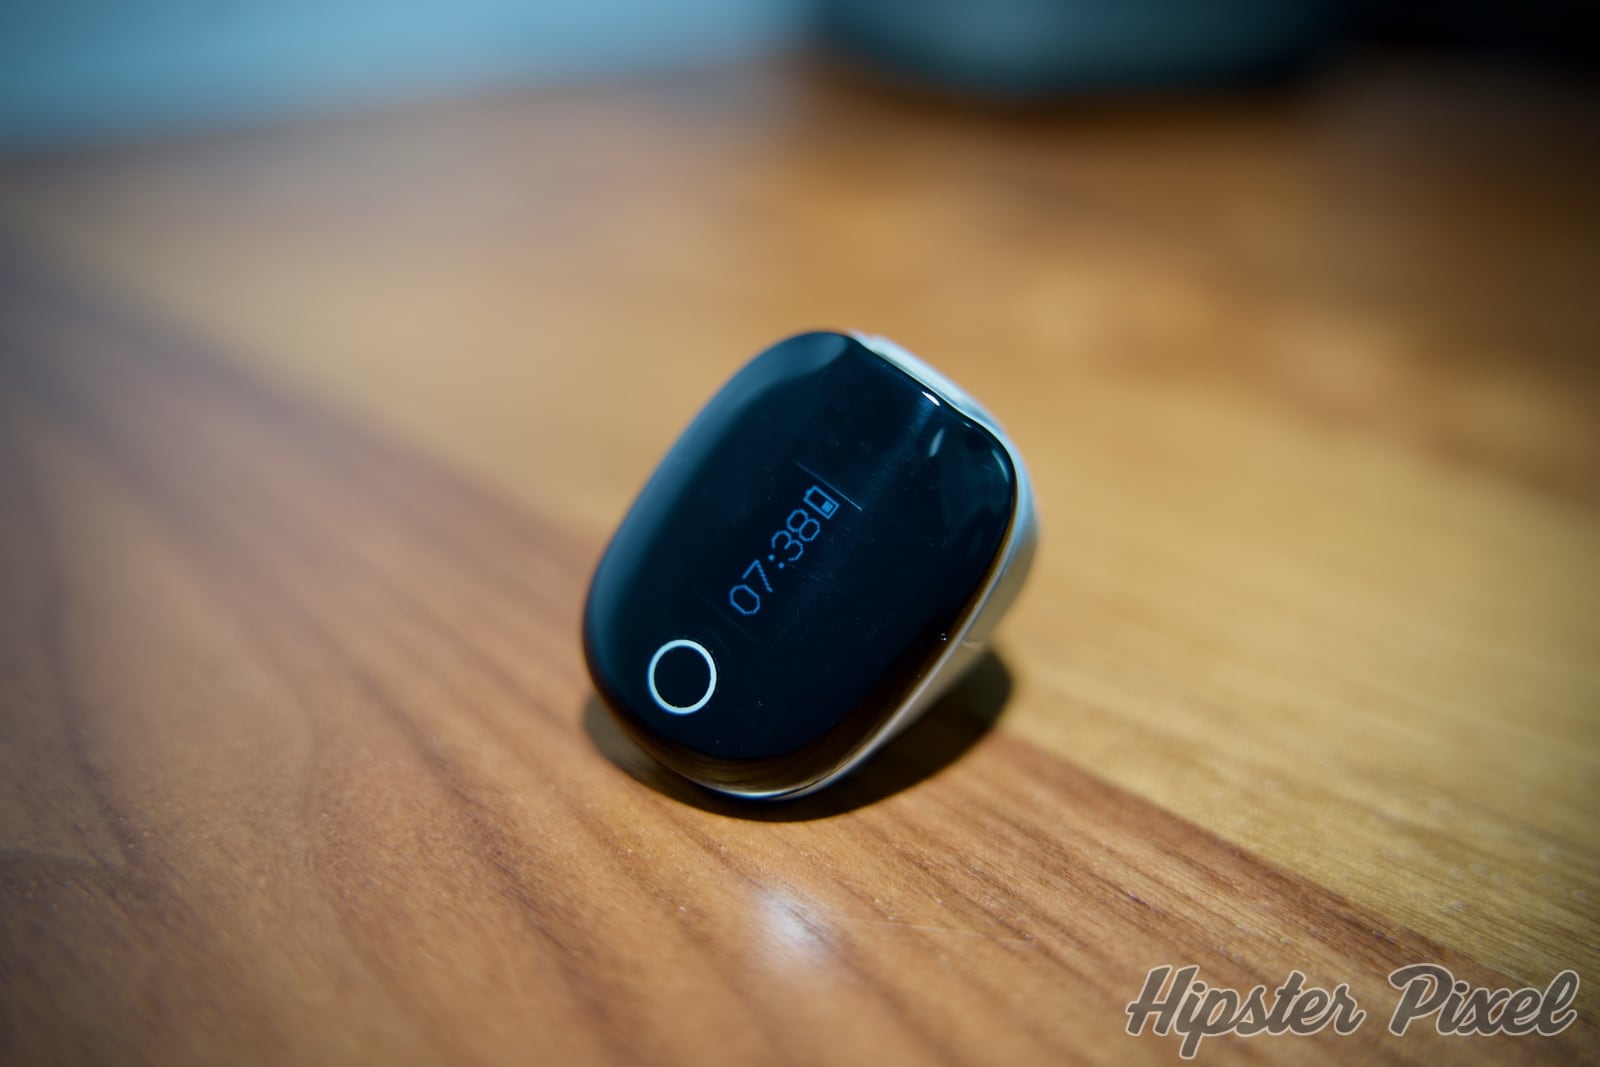 Wellue O2Ring, a Compact Night Oxymeter Review